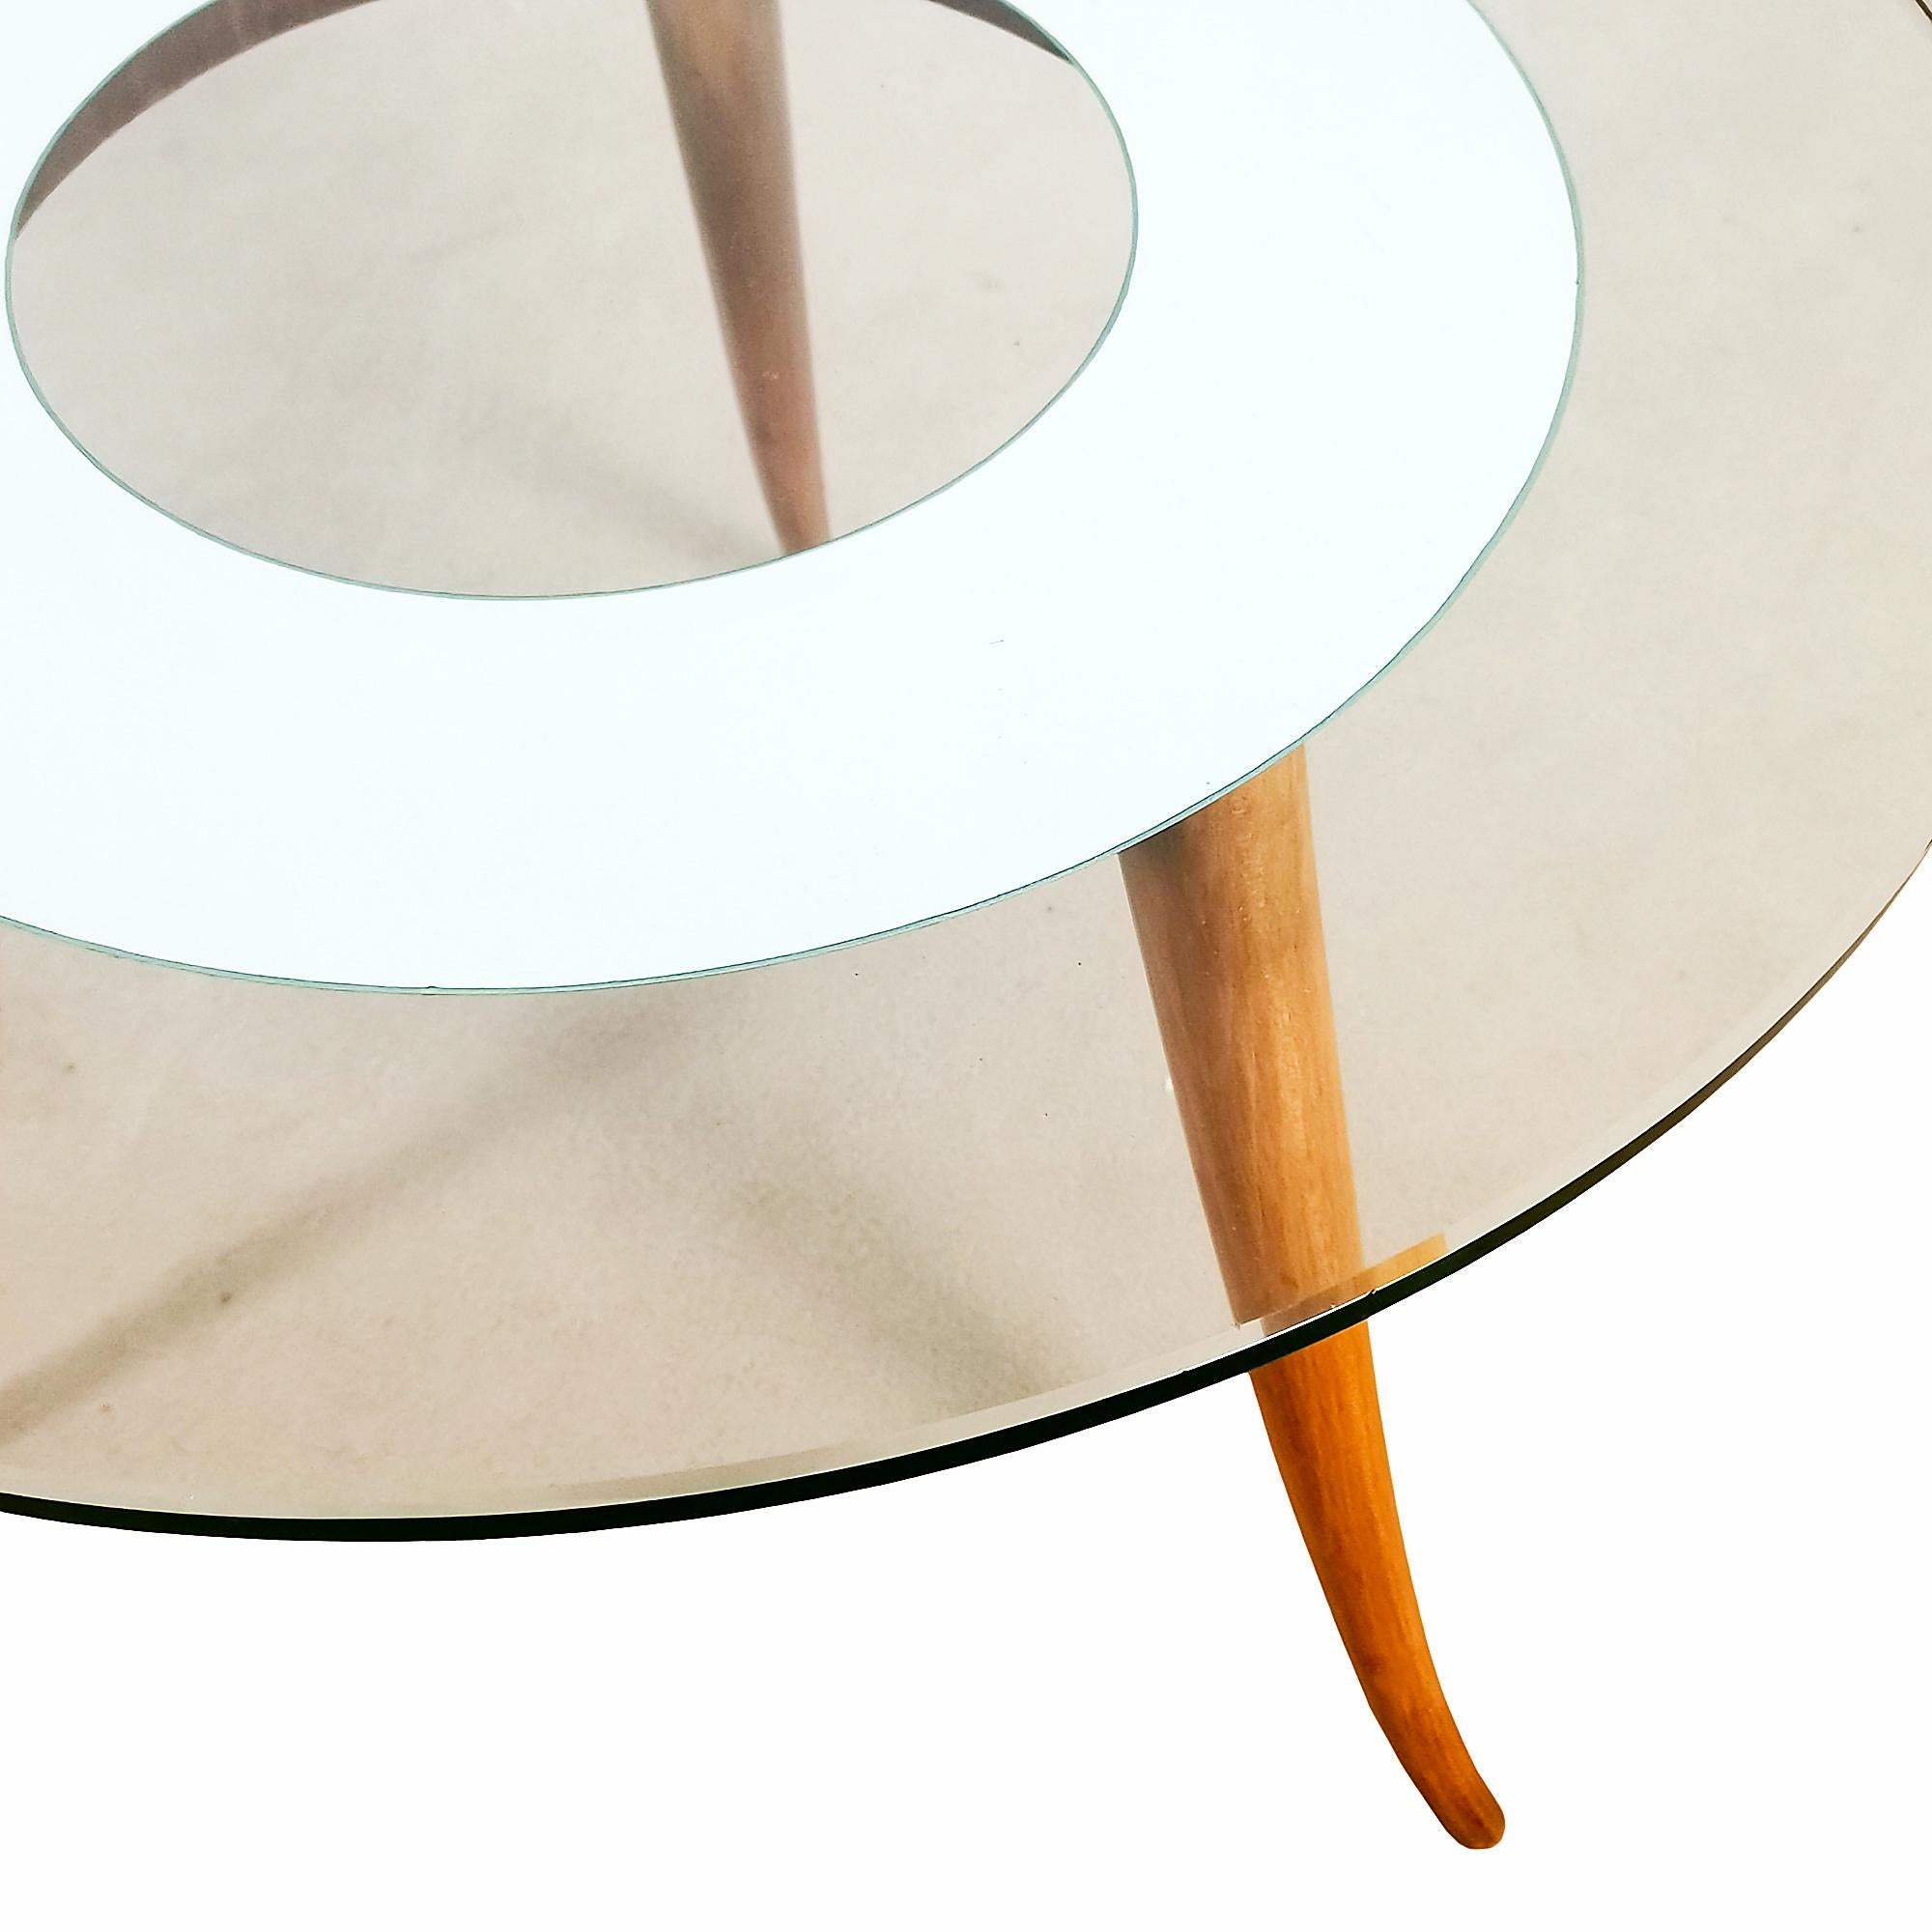 Art Deco Side Table in Maple and Mirrored Glass Top - Italy, 1930 In Good Condition For Sale In Girona, ES